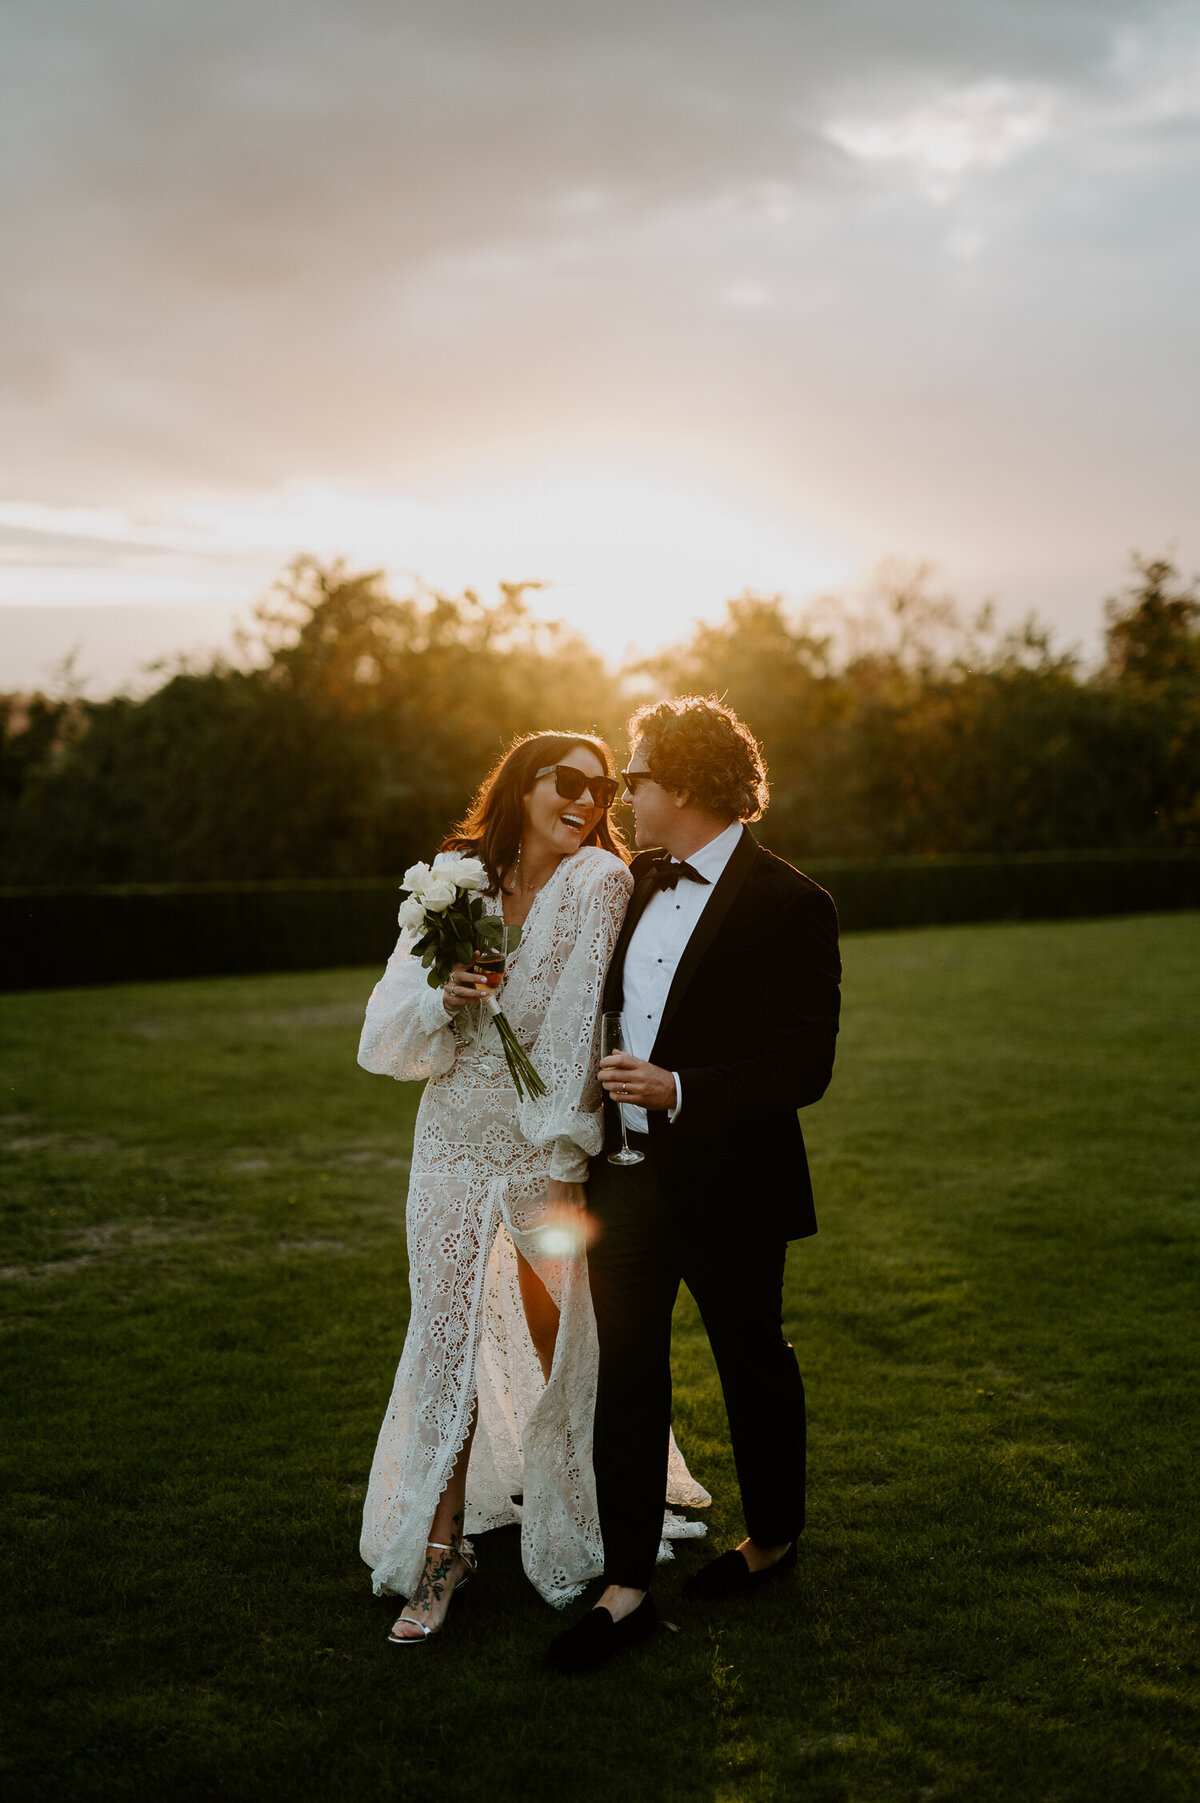 Martine McCutcheon and her husband Jack enjoy a glass of champagne during the sunset at Beaverbrook in Surrey after their vow renewel. Martine is wearing a white dress and sunglasses and carrying flowers whilst jack is wearing a black tux and sunglasses.